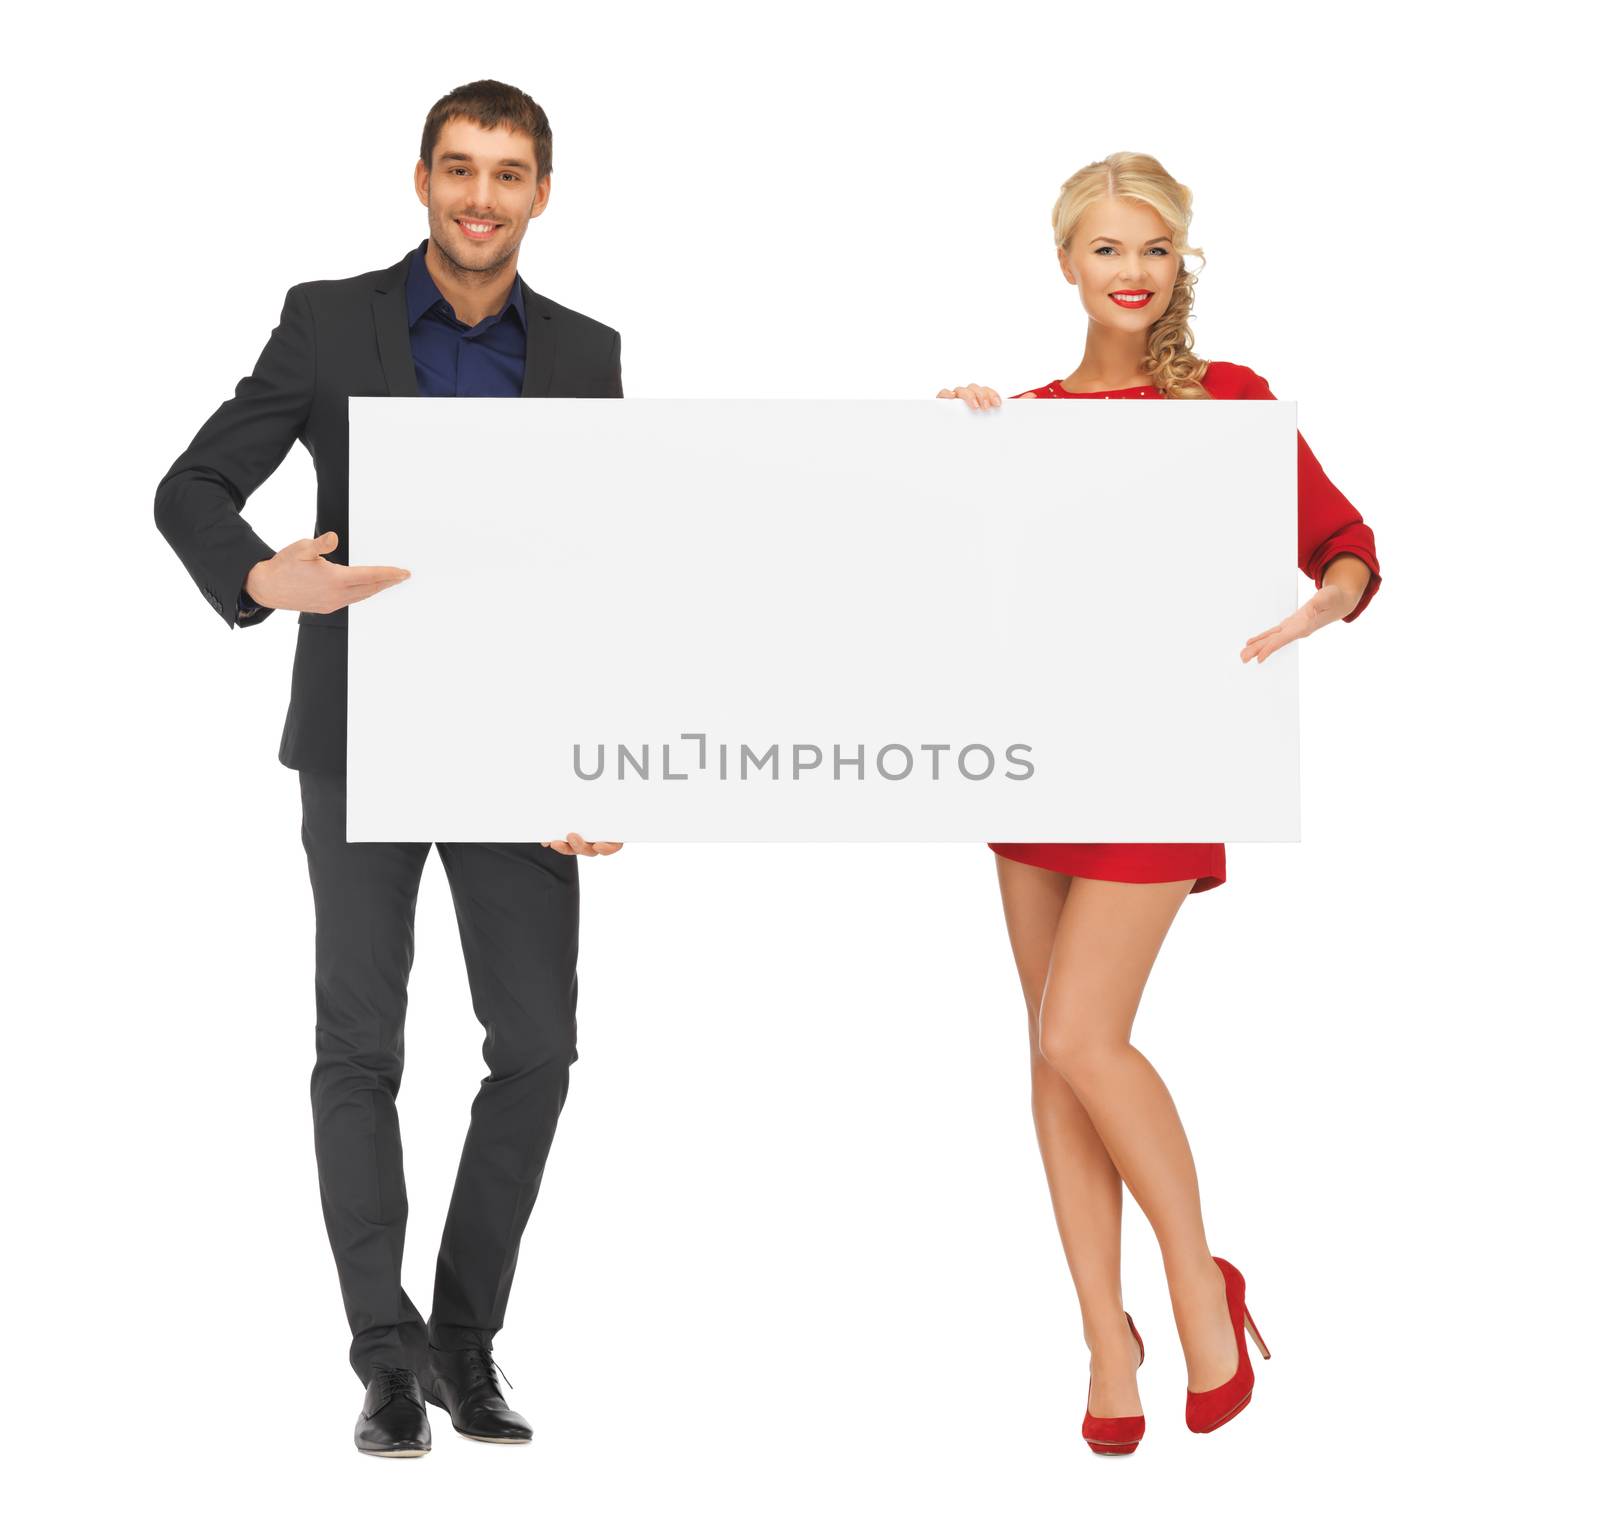 advertising and fashion concept - smiling couple holding big blank white board